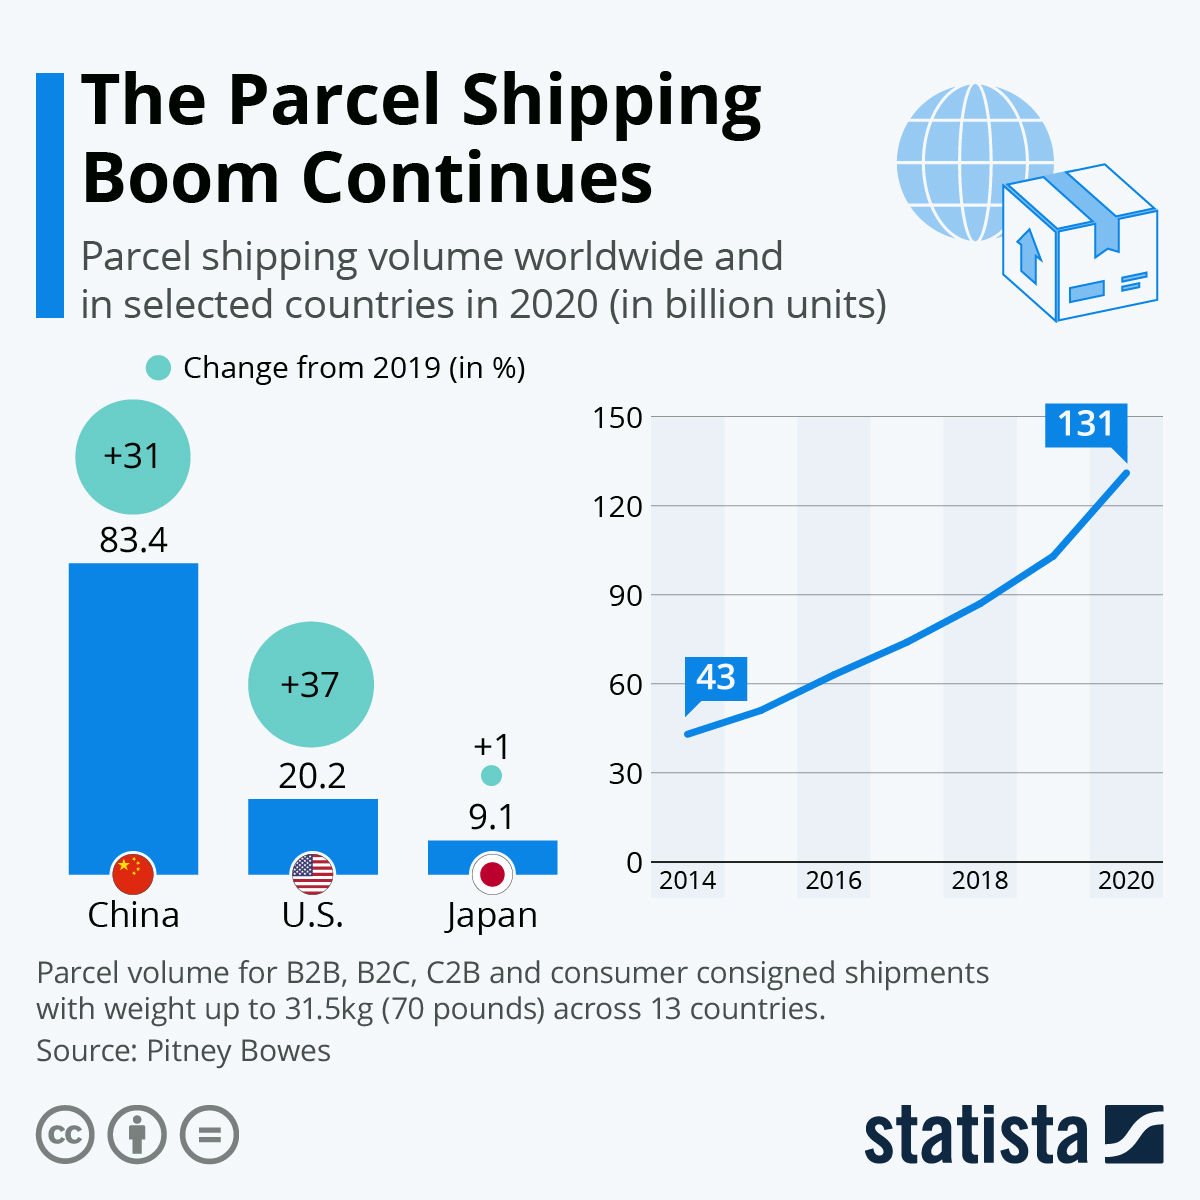 The Parcel Shipping Boom Continues
